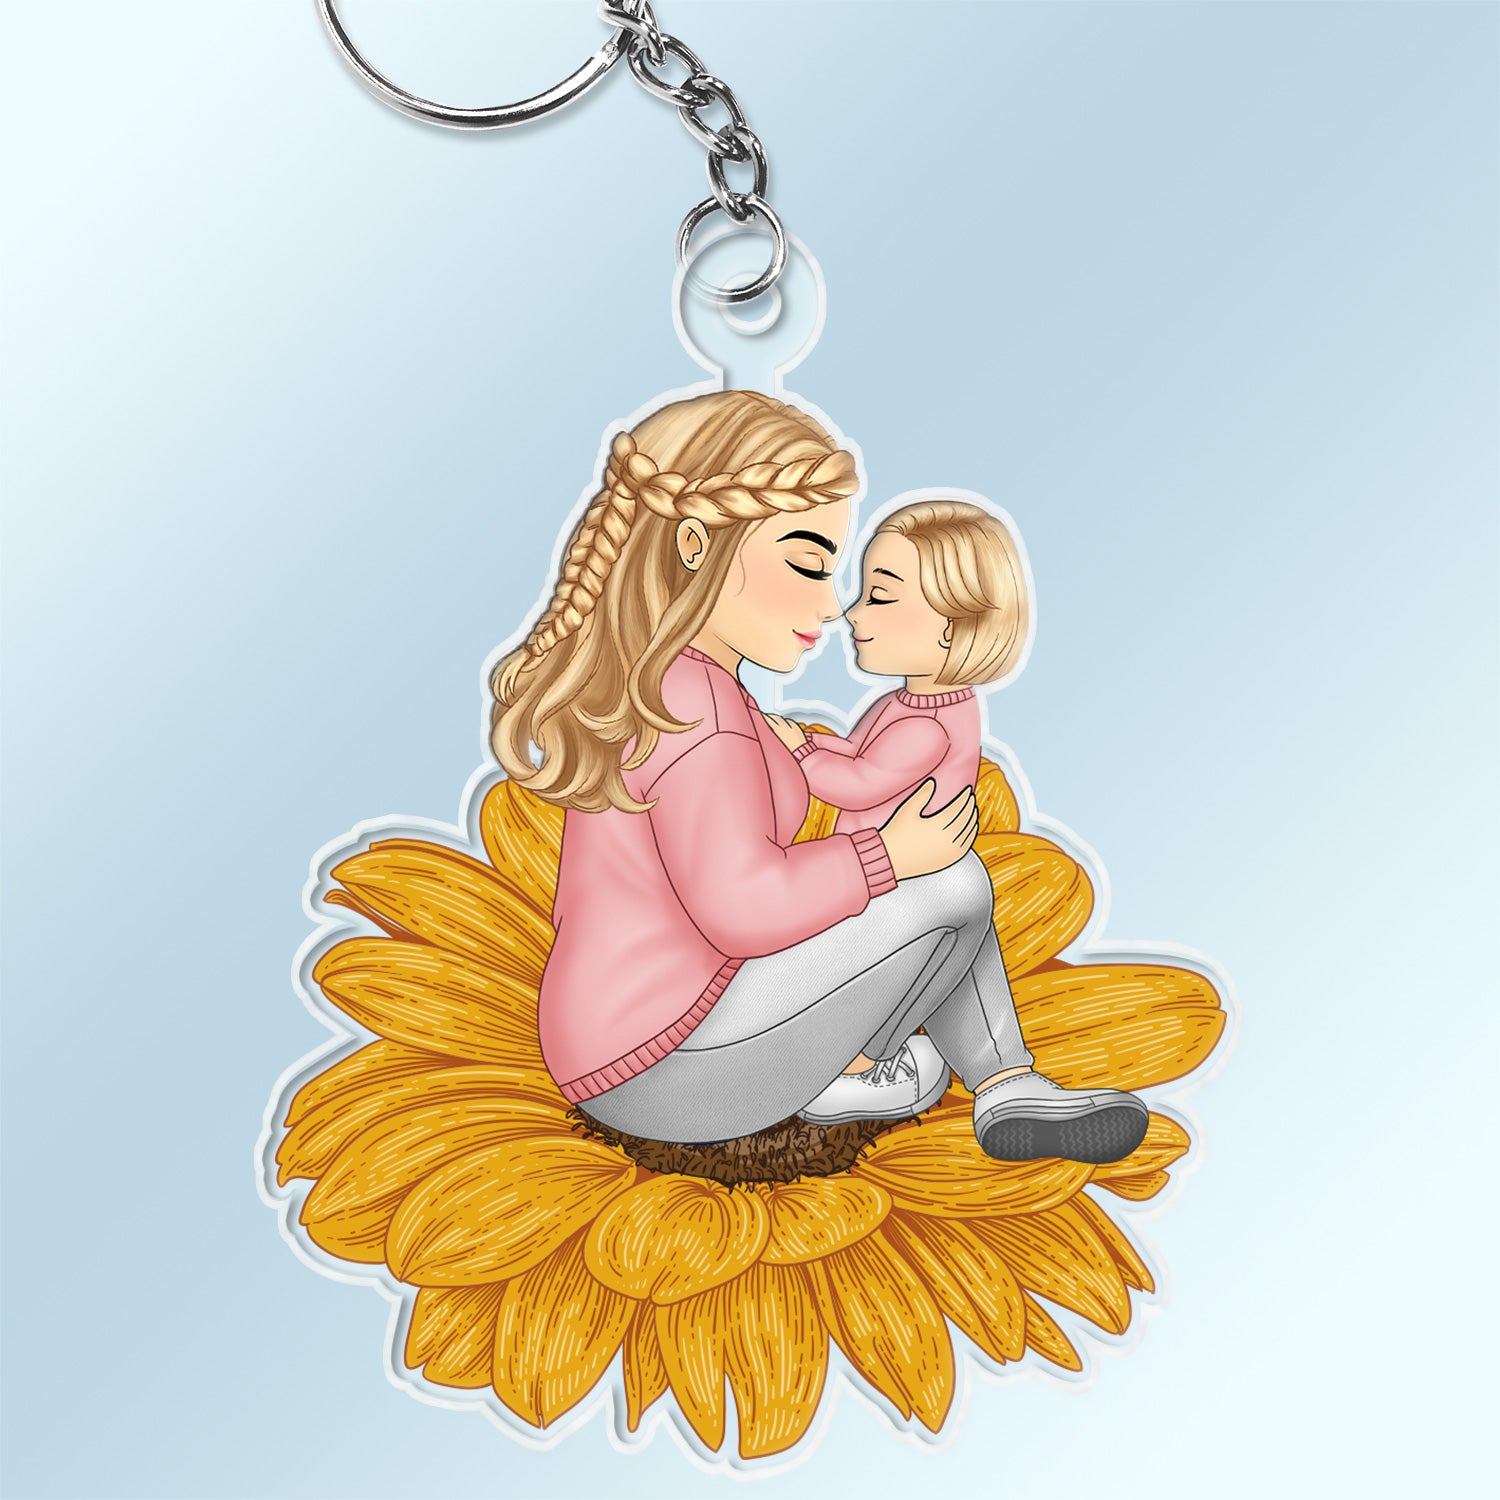 Grandma Mother And Child Sitting On A Flower - Gift For Mother And Grandma - Personalized Cutout Acrylic Keychain